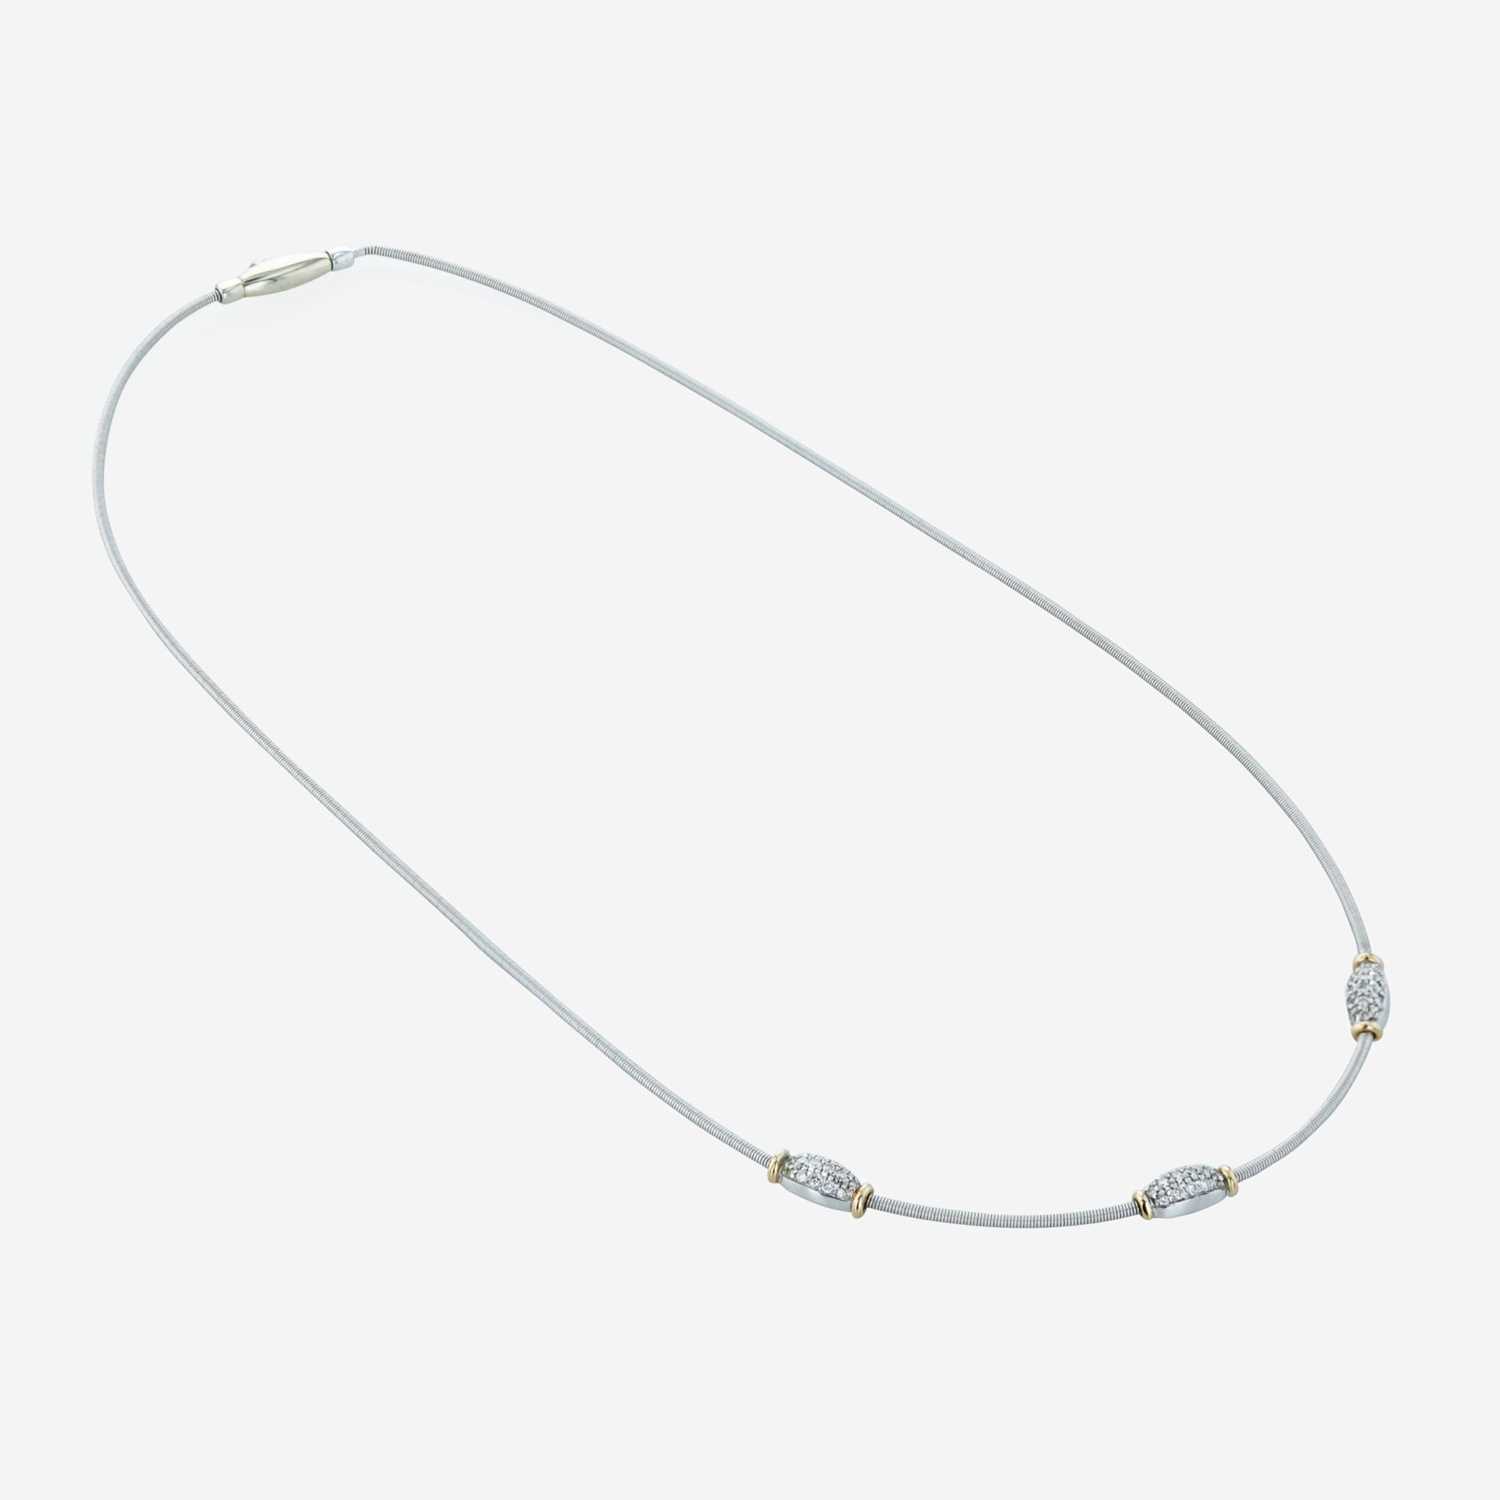 Lot 63 - A 14K bicolor gold necklace with diamonds